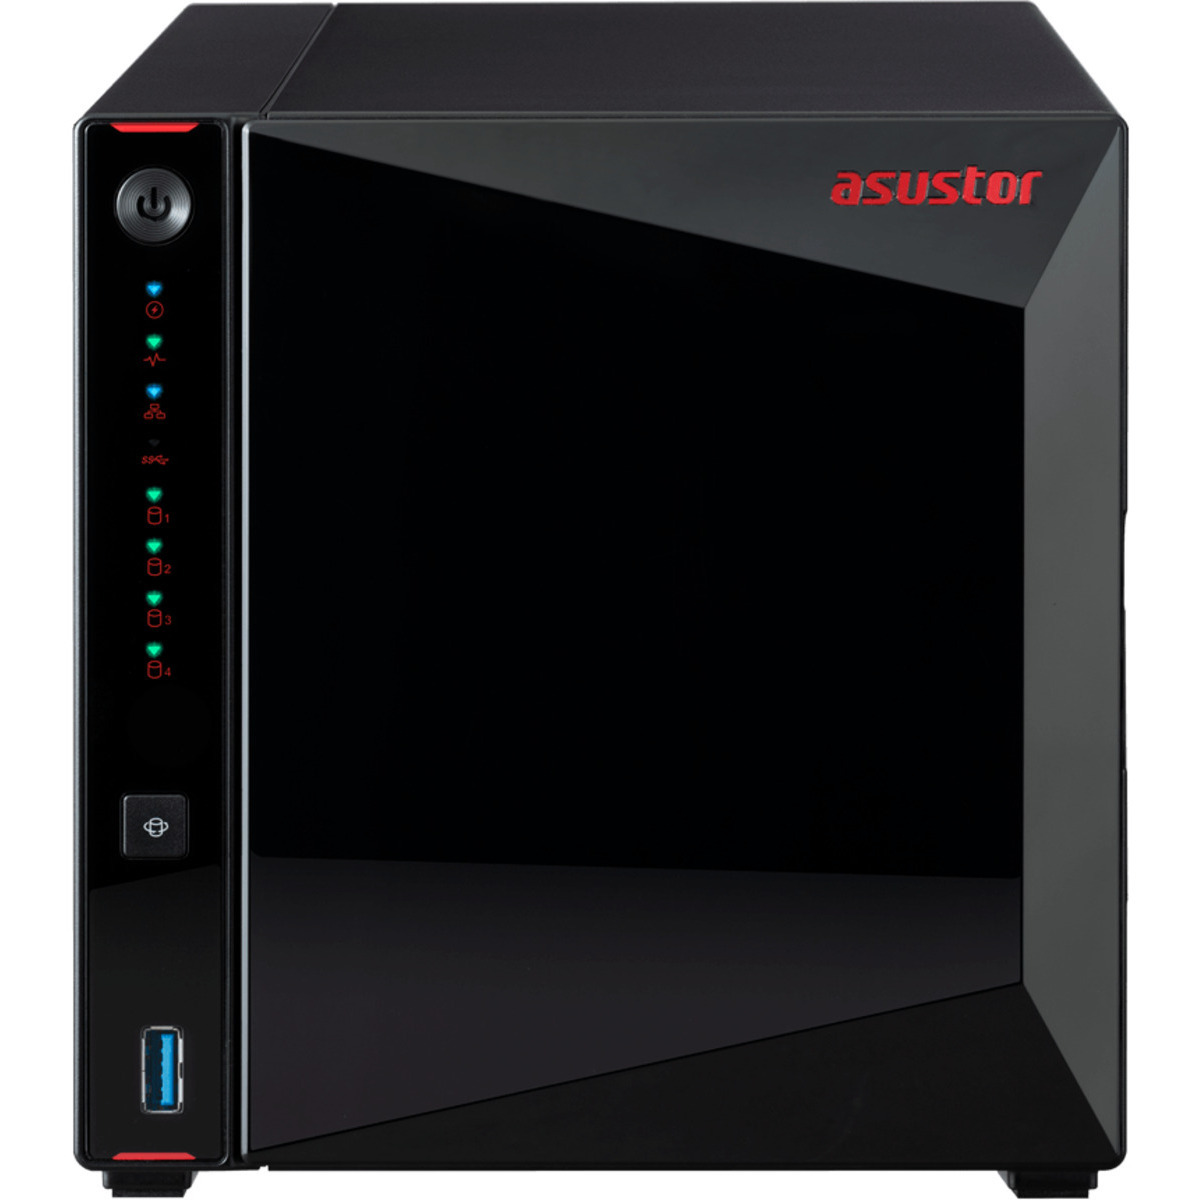 ASUSTOR AS5304T Nimbustor 64tb 4-Bay Desktop Multimedia / Power User / Business NAS - Network Attached Storage Device 4x16tb Seagate IronWolf Pro ST16000NT001 3.5 7200rpm SATA 6Gb/s HDD NAS Class Drives Installed - Burn-In Tested - ON SALE - FREE RAM UPGRADE AS5304T Nimbustor